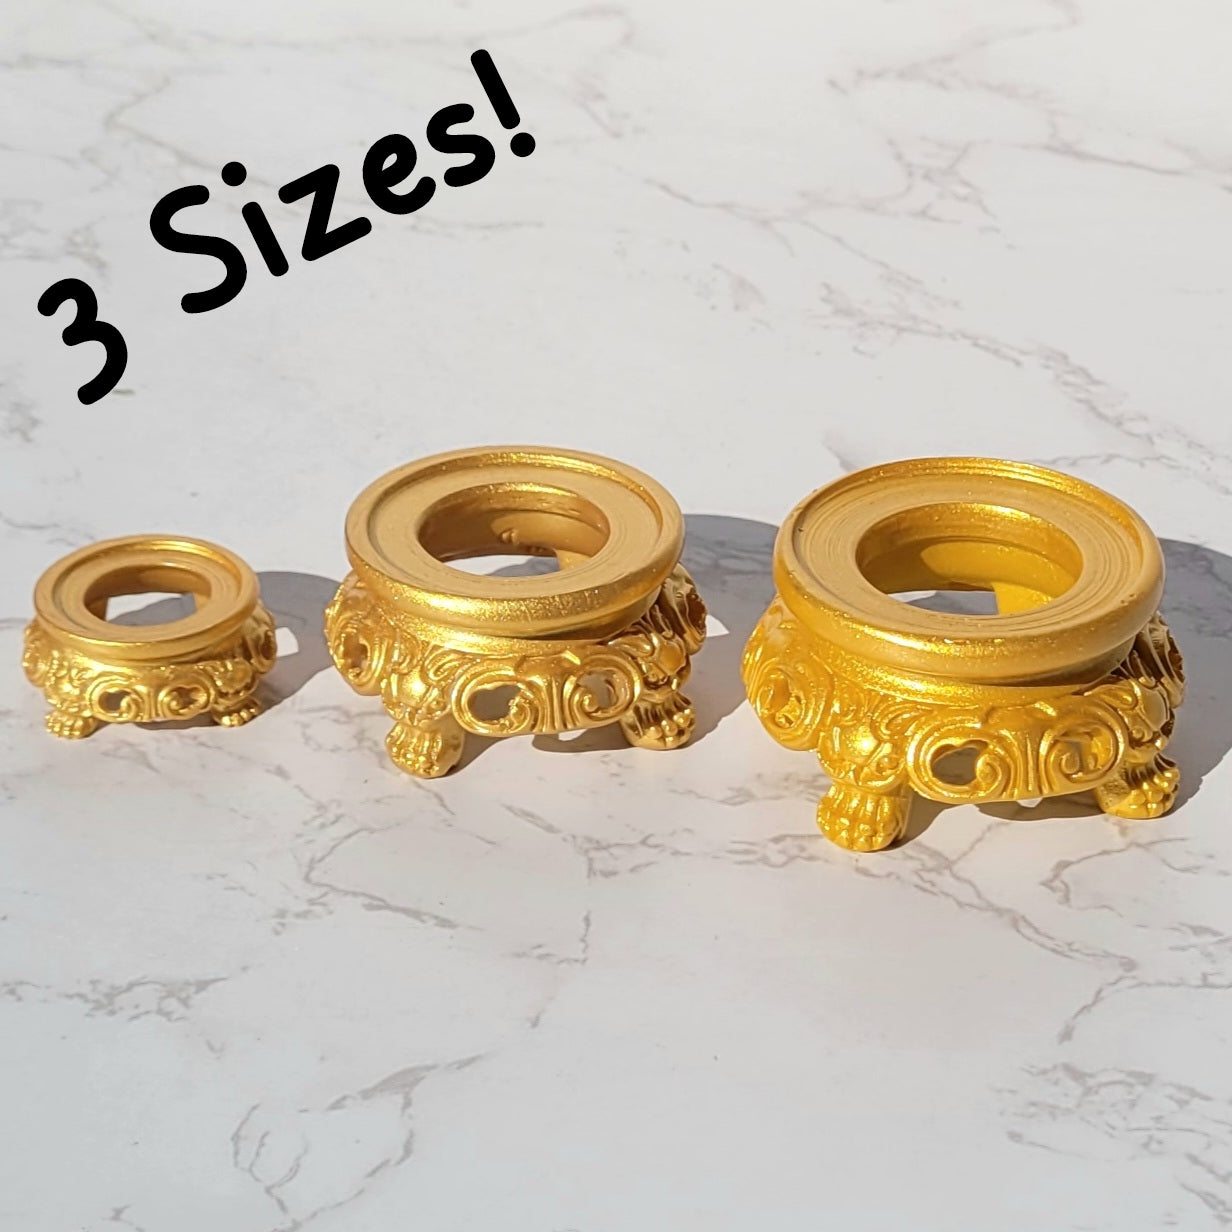 Gold resin decorative sphere stands